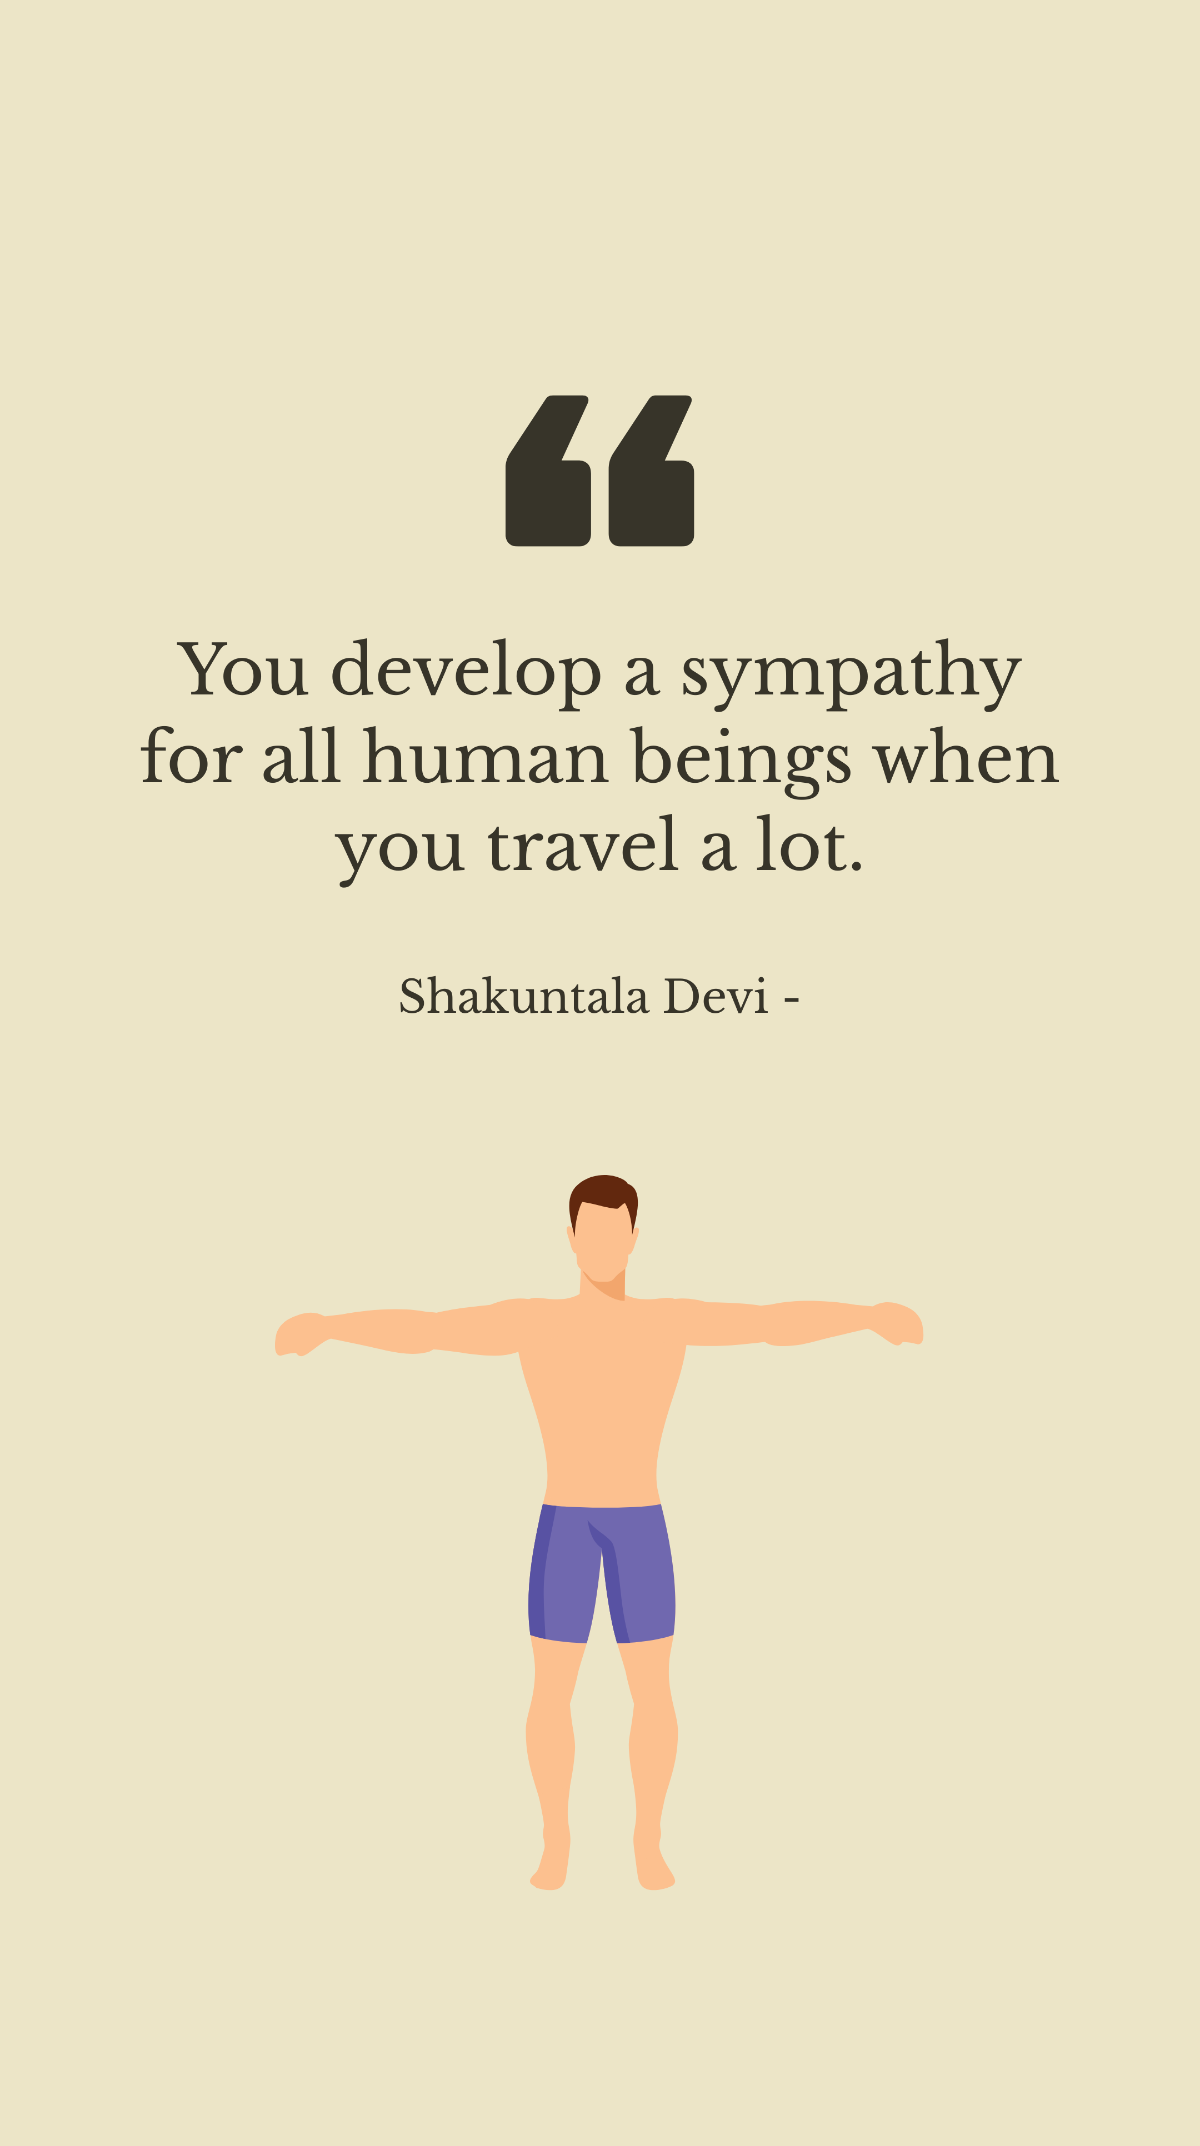 Shakuntala Devi - You develop a sympathy for all human beings when you travel a lot. Template